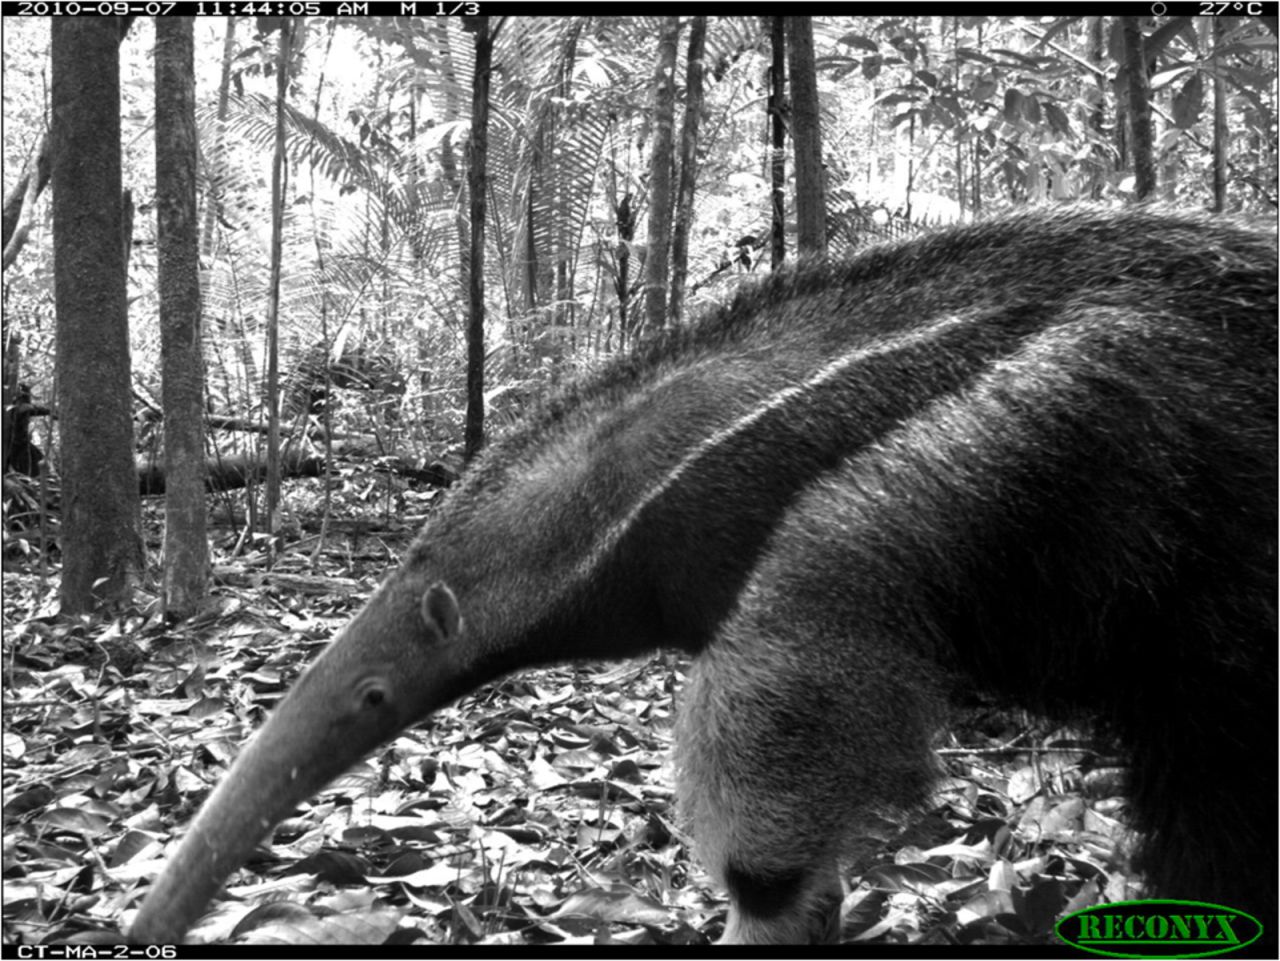 Camera traps are triggered by heat or movement. A giant anteater in Manaus, photographed in Brazil